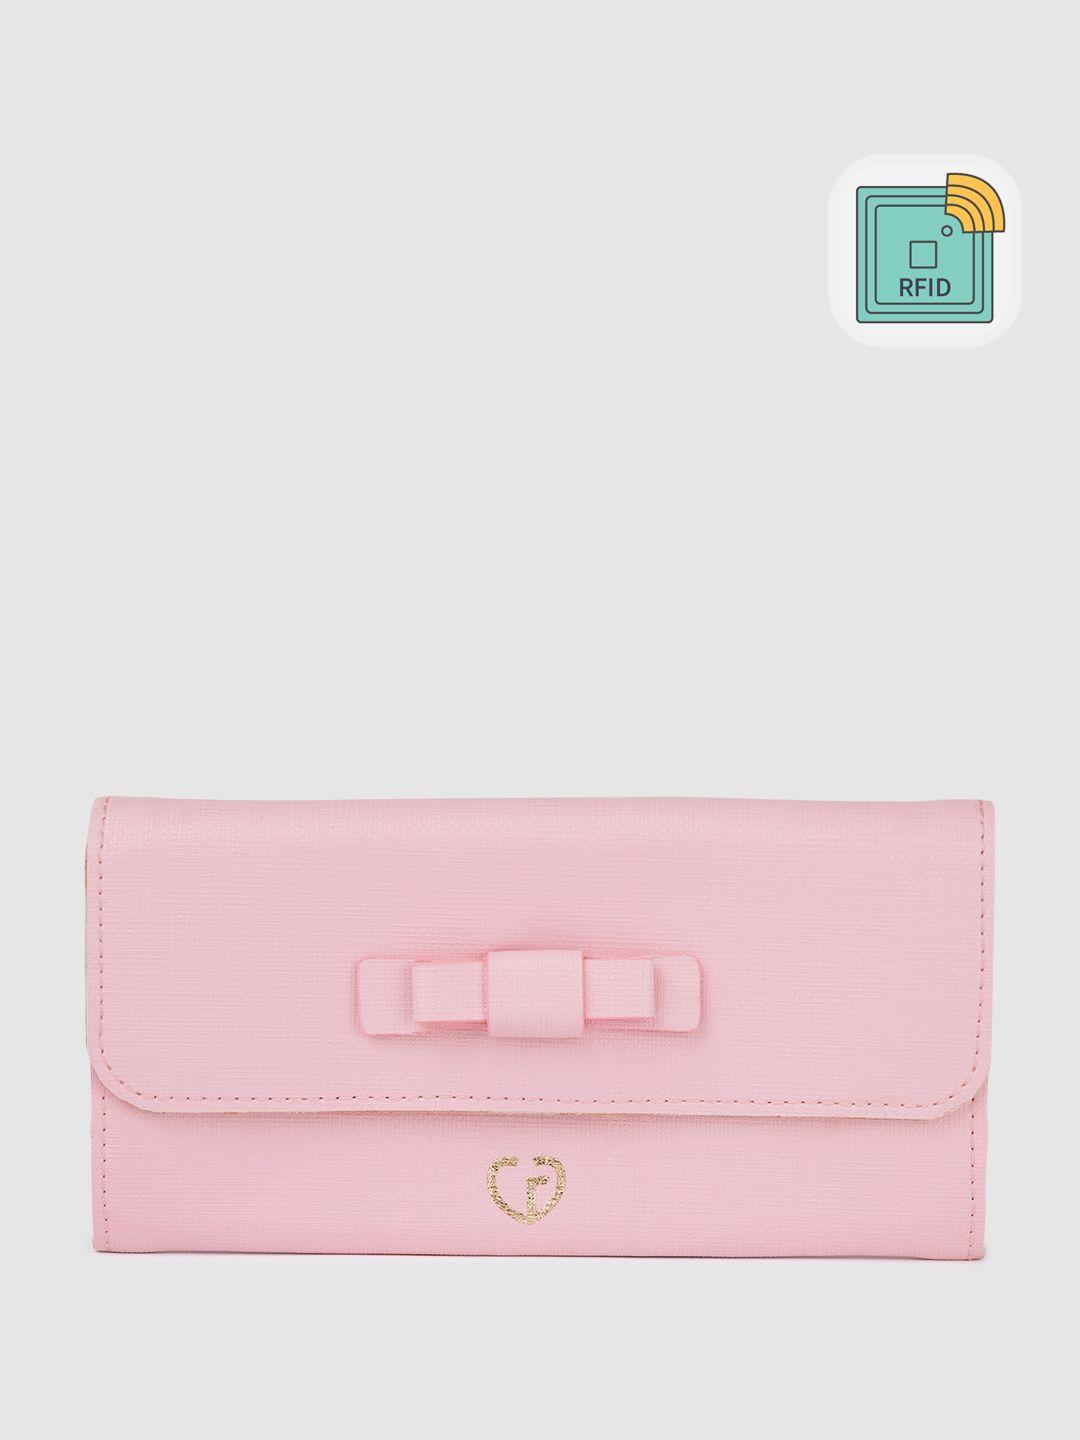 caprese women rfid envelope wallet with bow detail